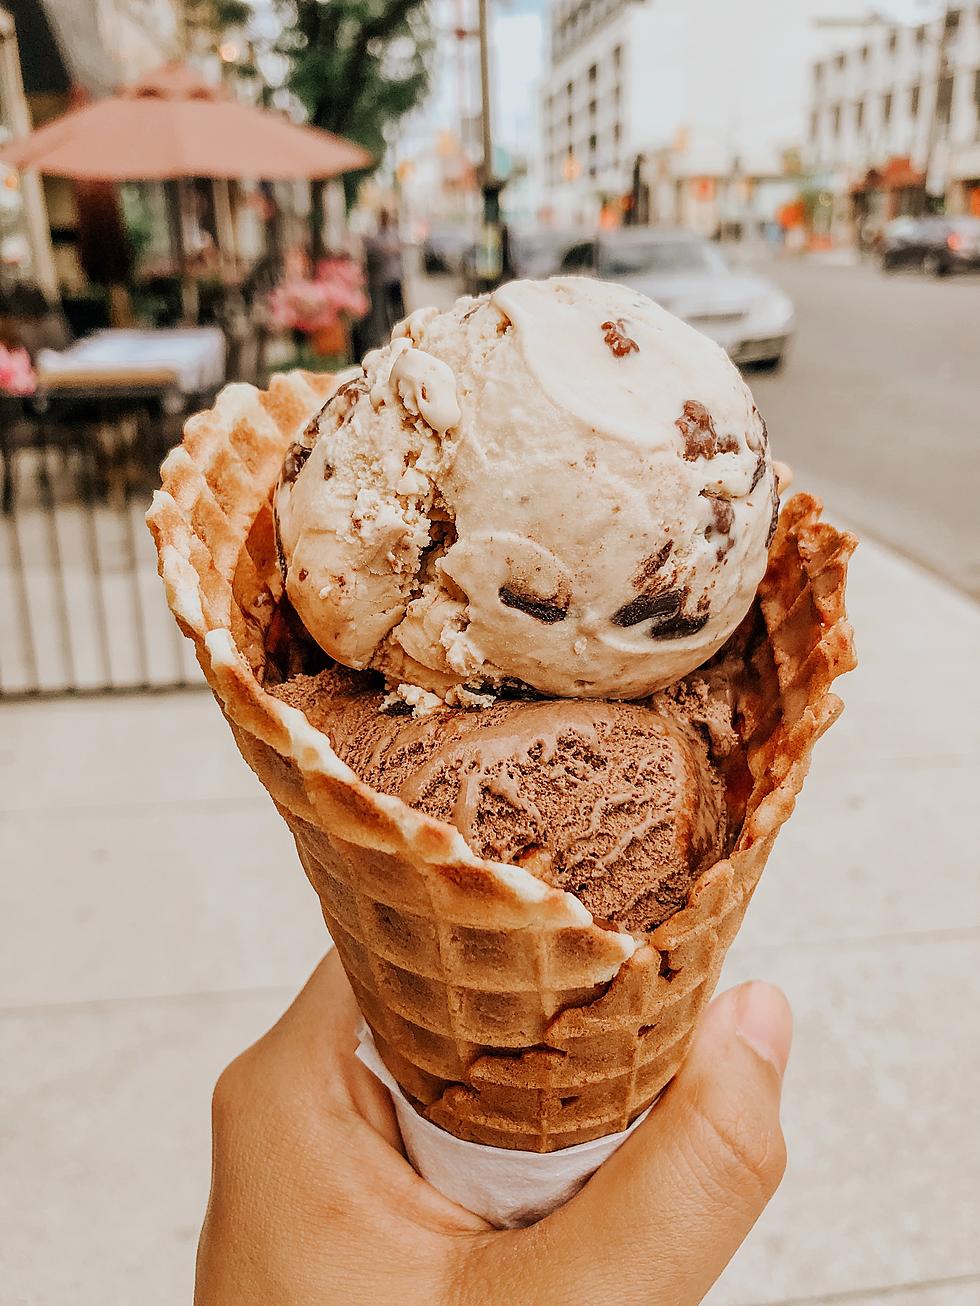 Free Ice Cream That You’ll Actually Want In Boise